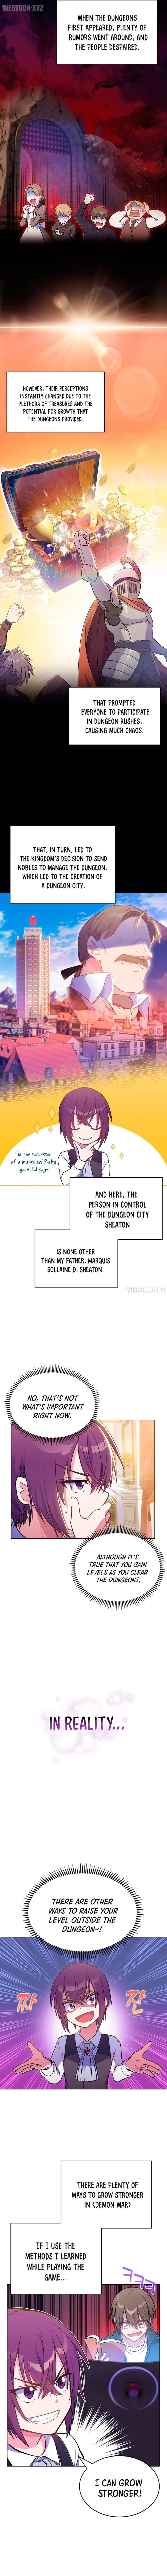 never-die-extra-chap-3-4